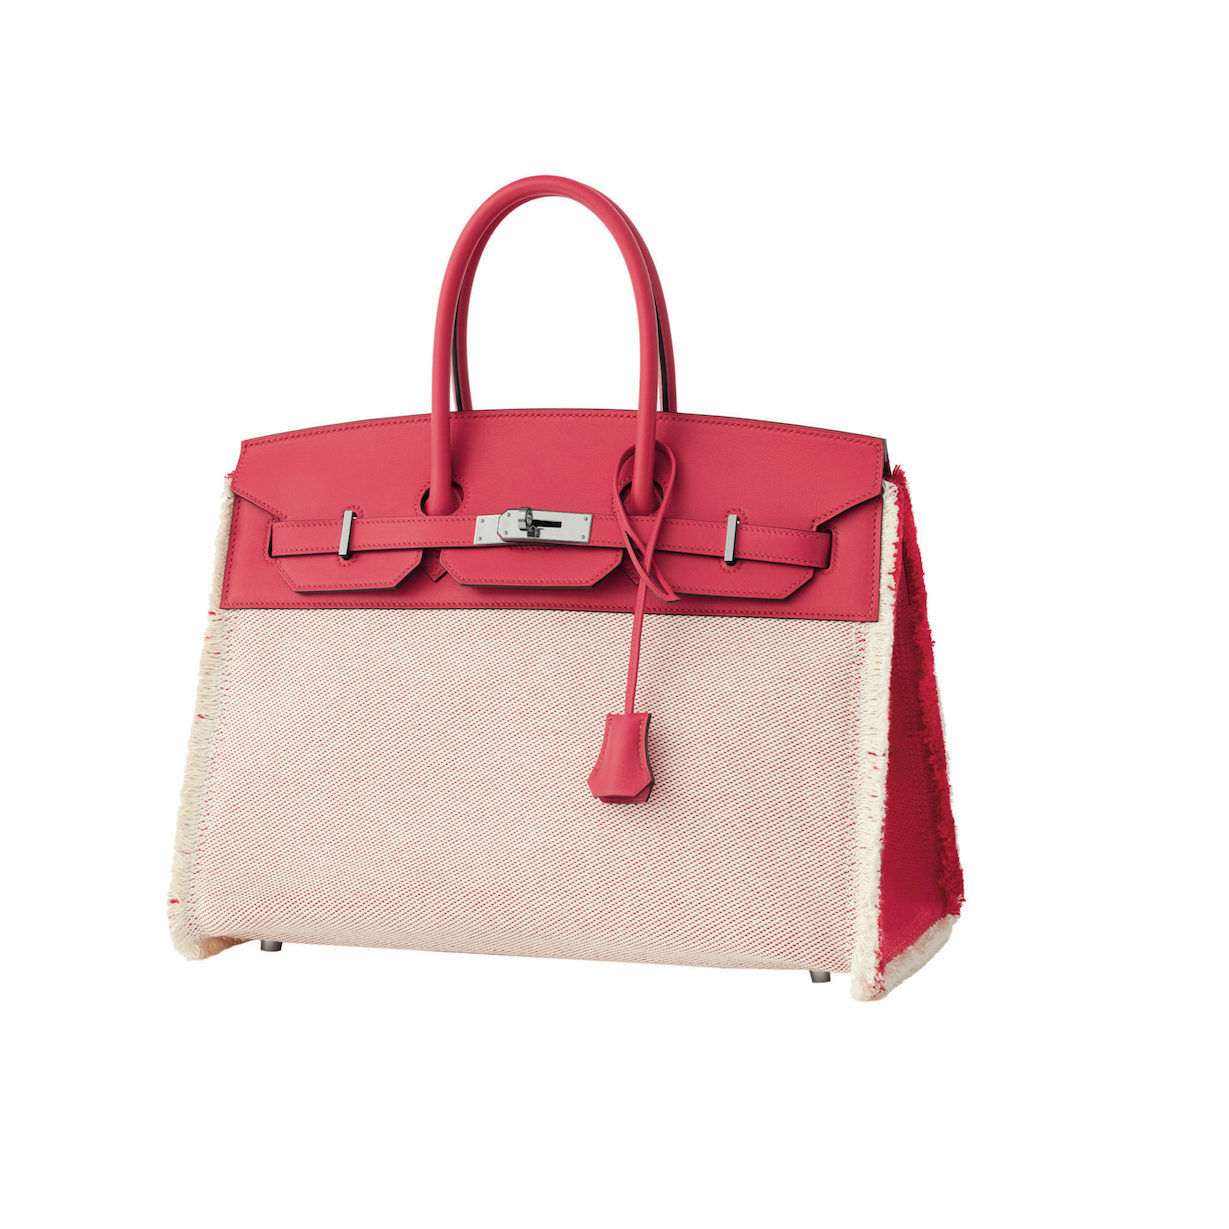 Hermes SS21: the best new bags and scarves from the Objets collection